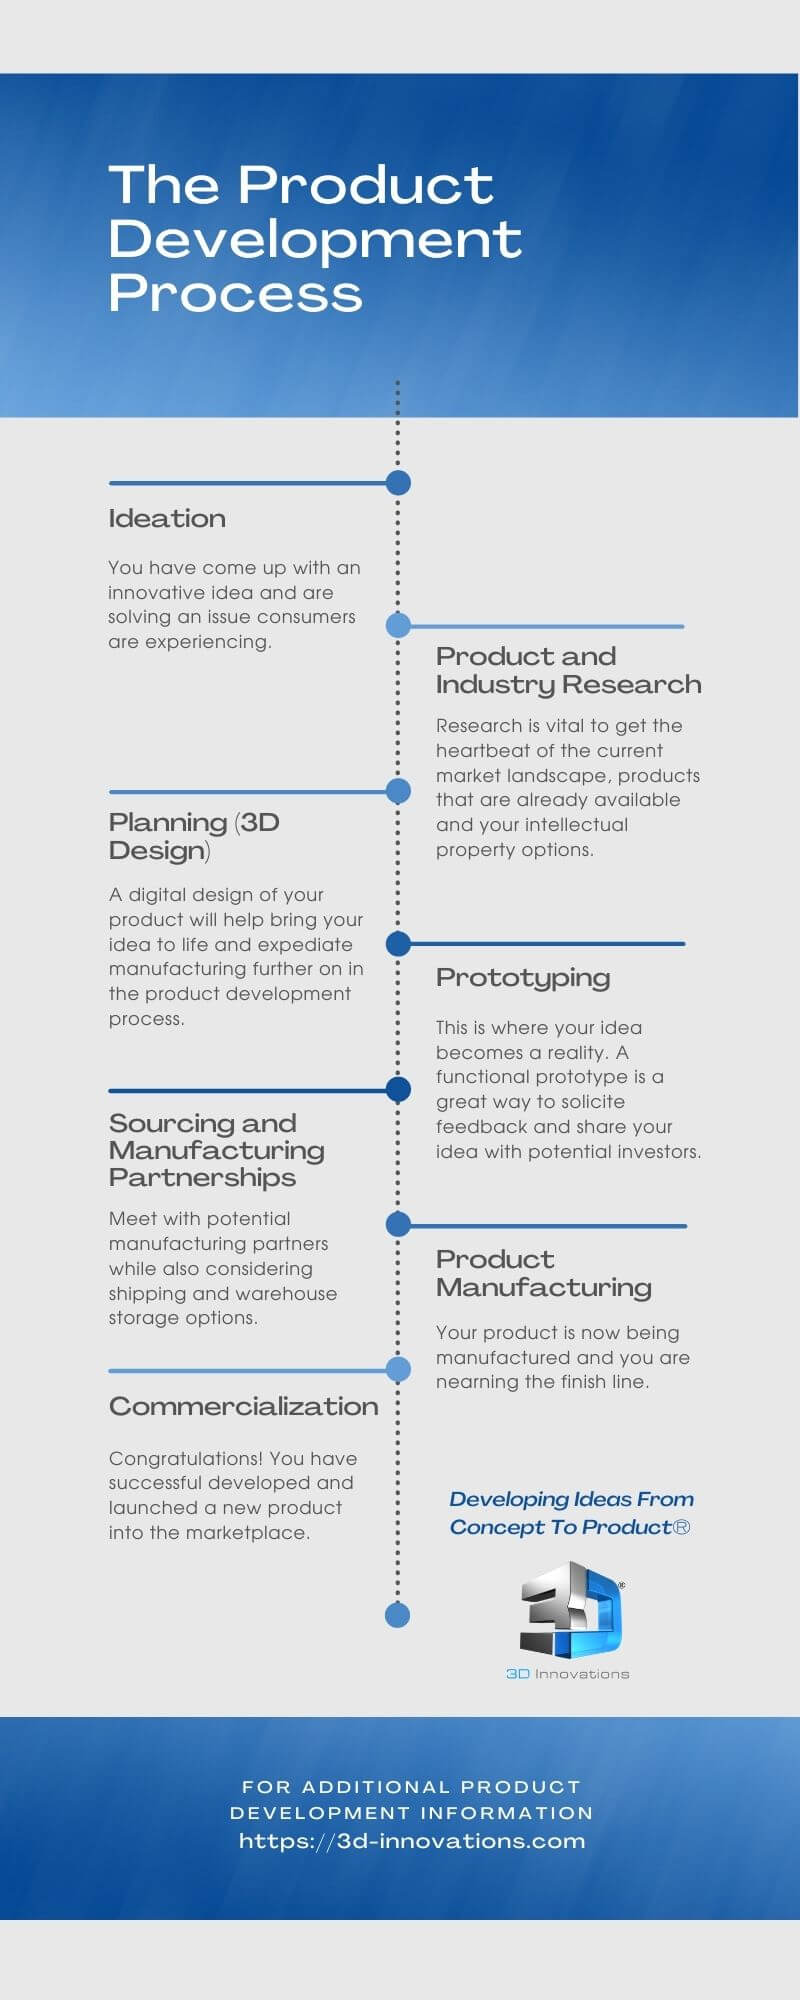 The product development process step-by-step guide for entrepreneurs.